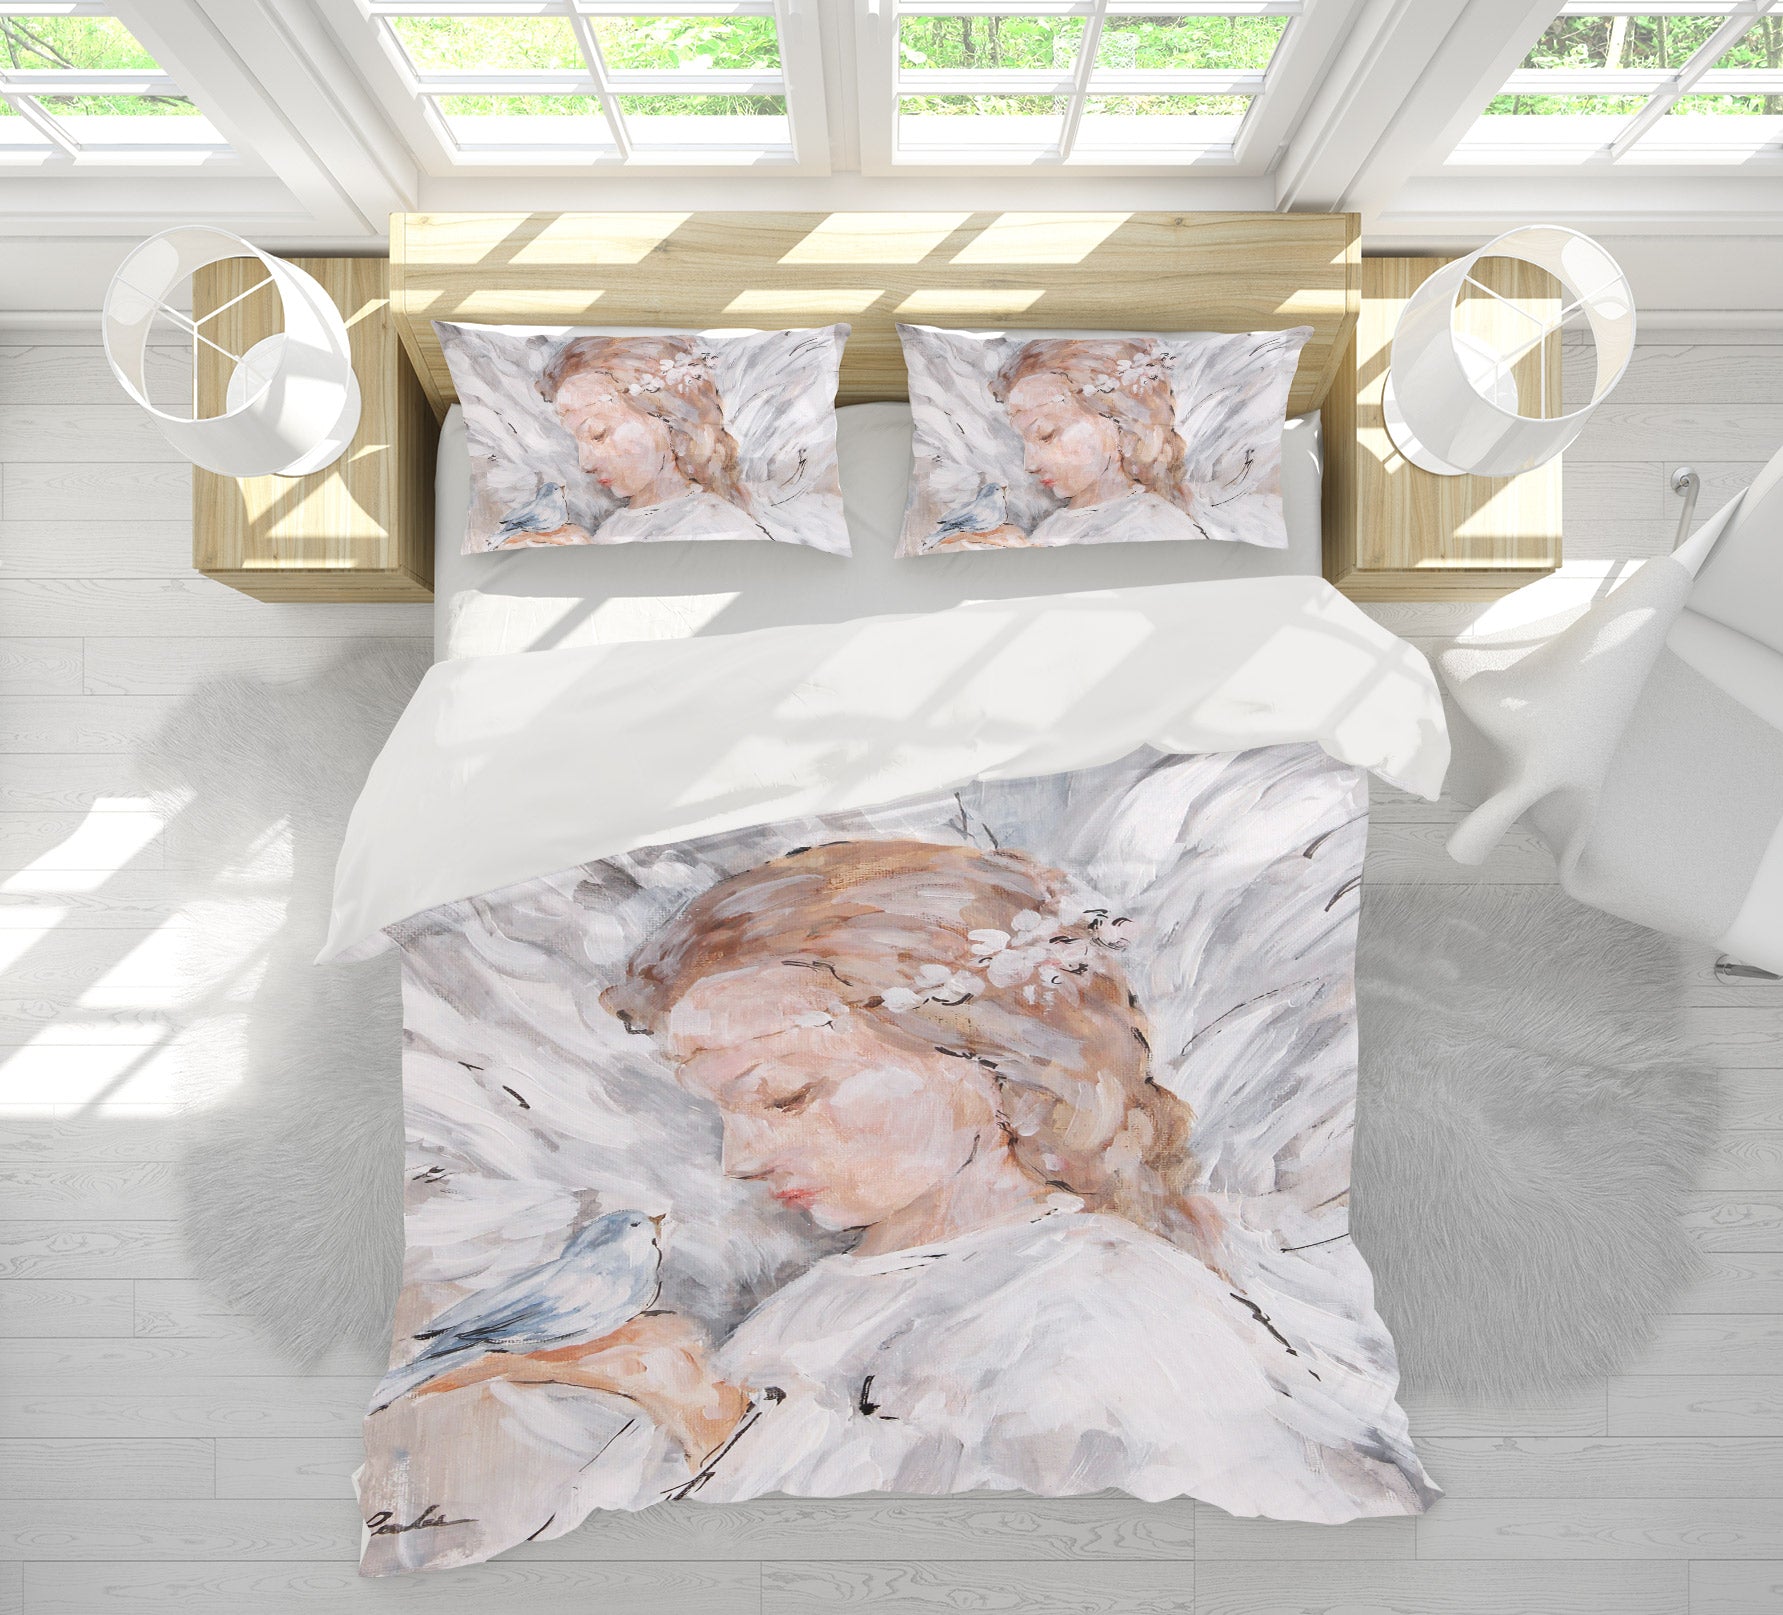 3D Angel Dove 2157 Debi Coules Bedding Bed Pillowcases Quilt